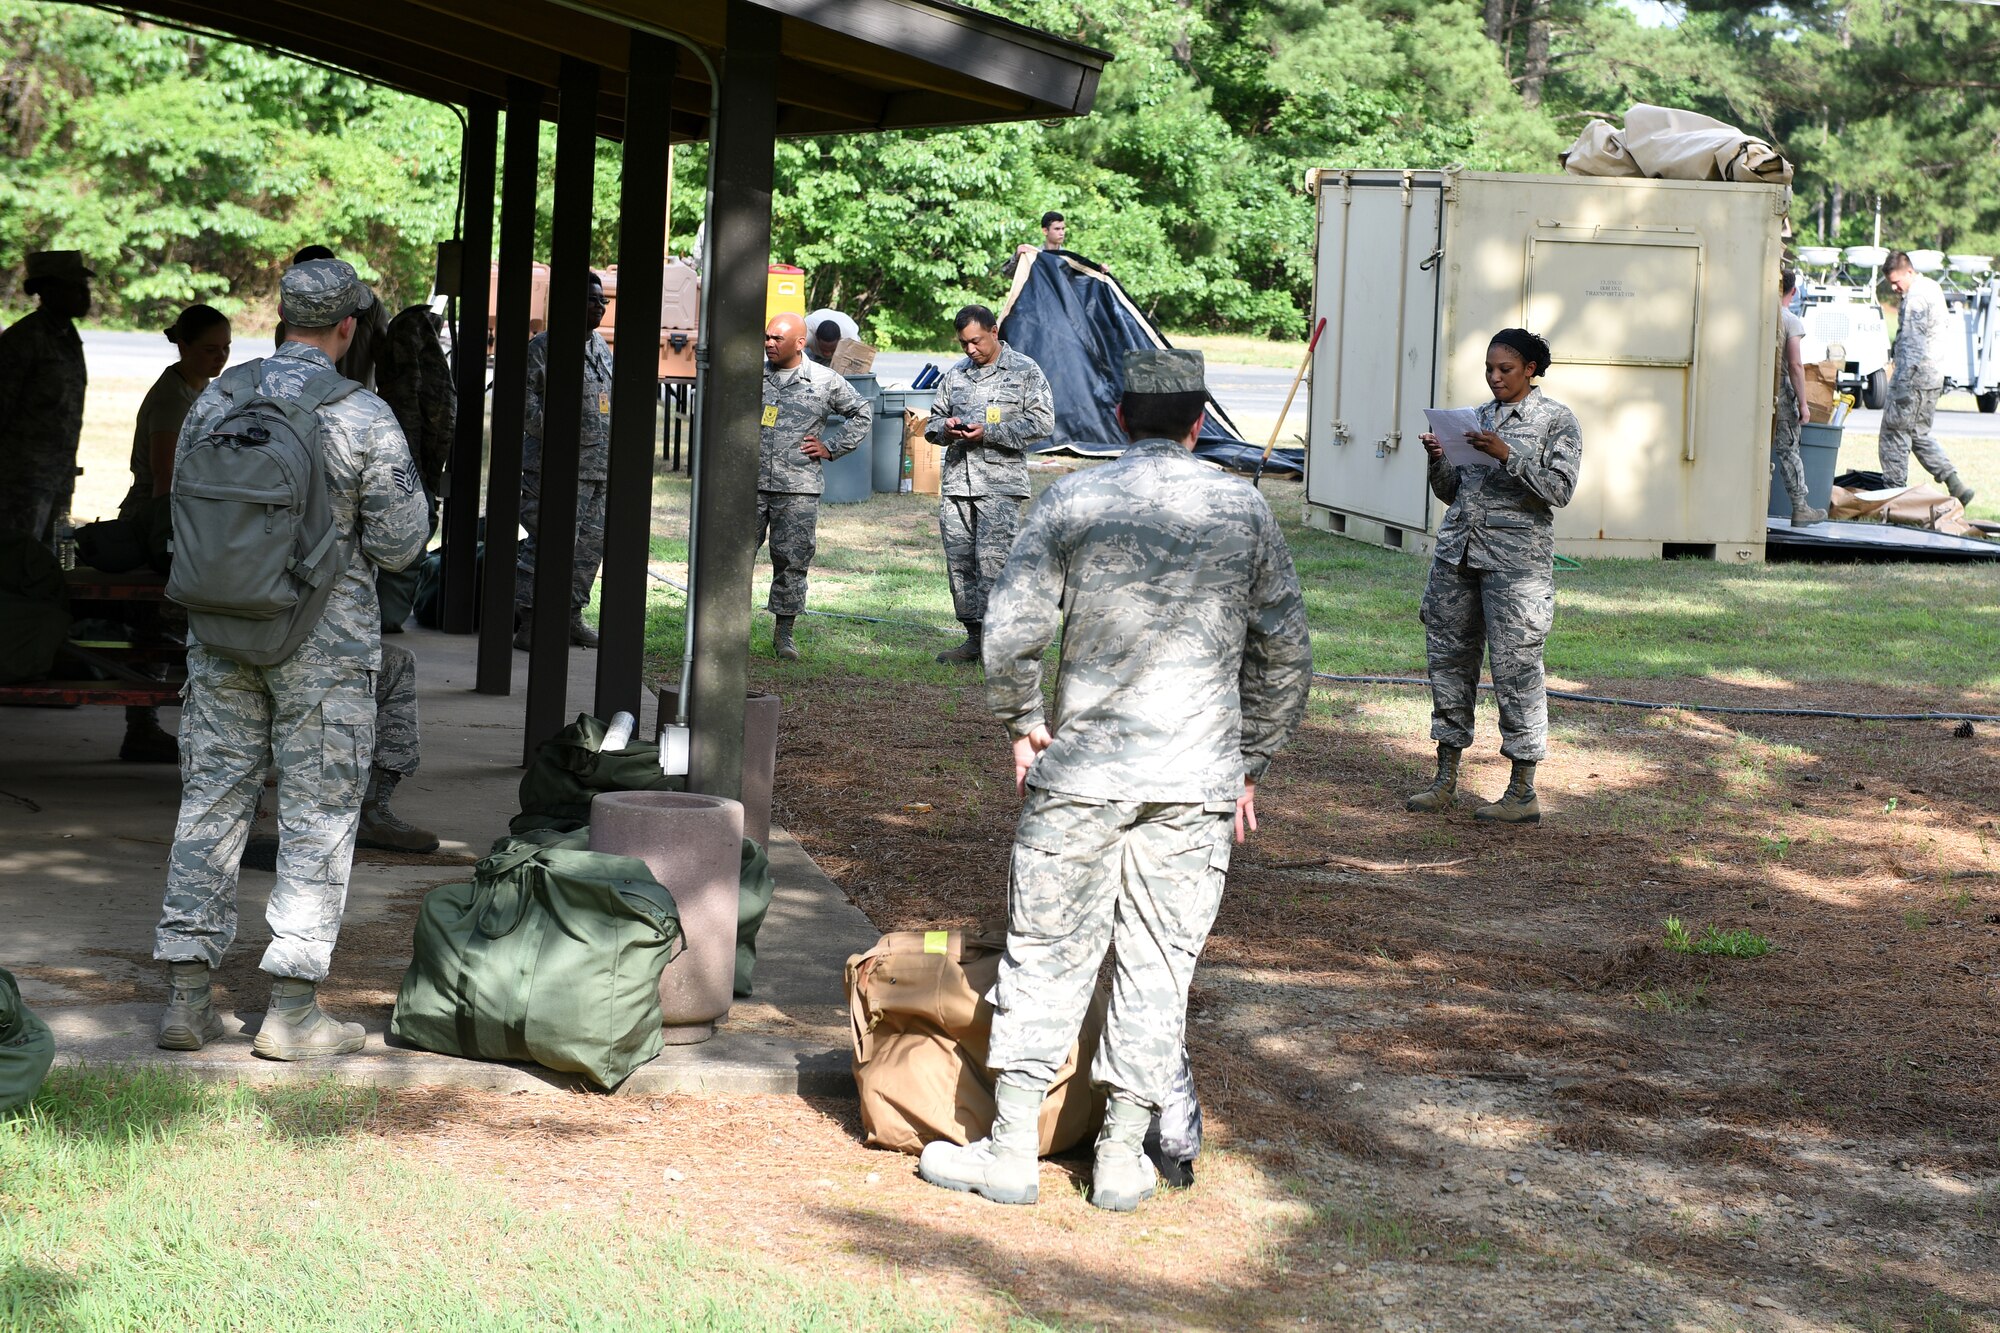 People in uniforms participate in an exercise wearing various equipment and gas masks.